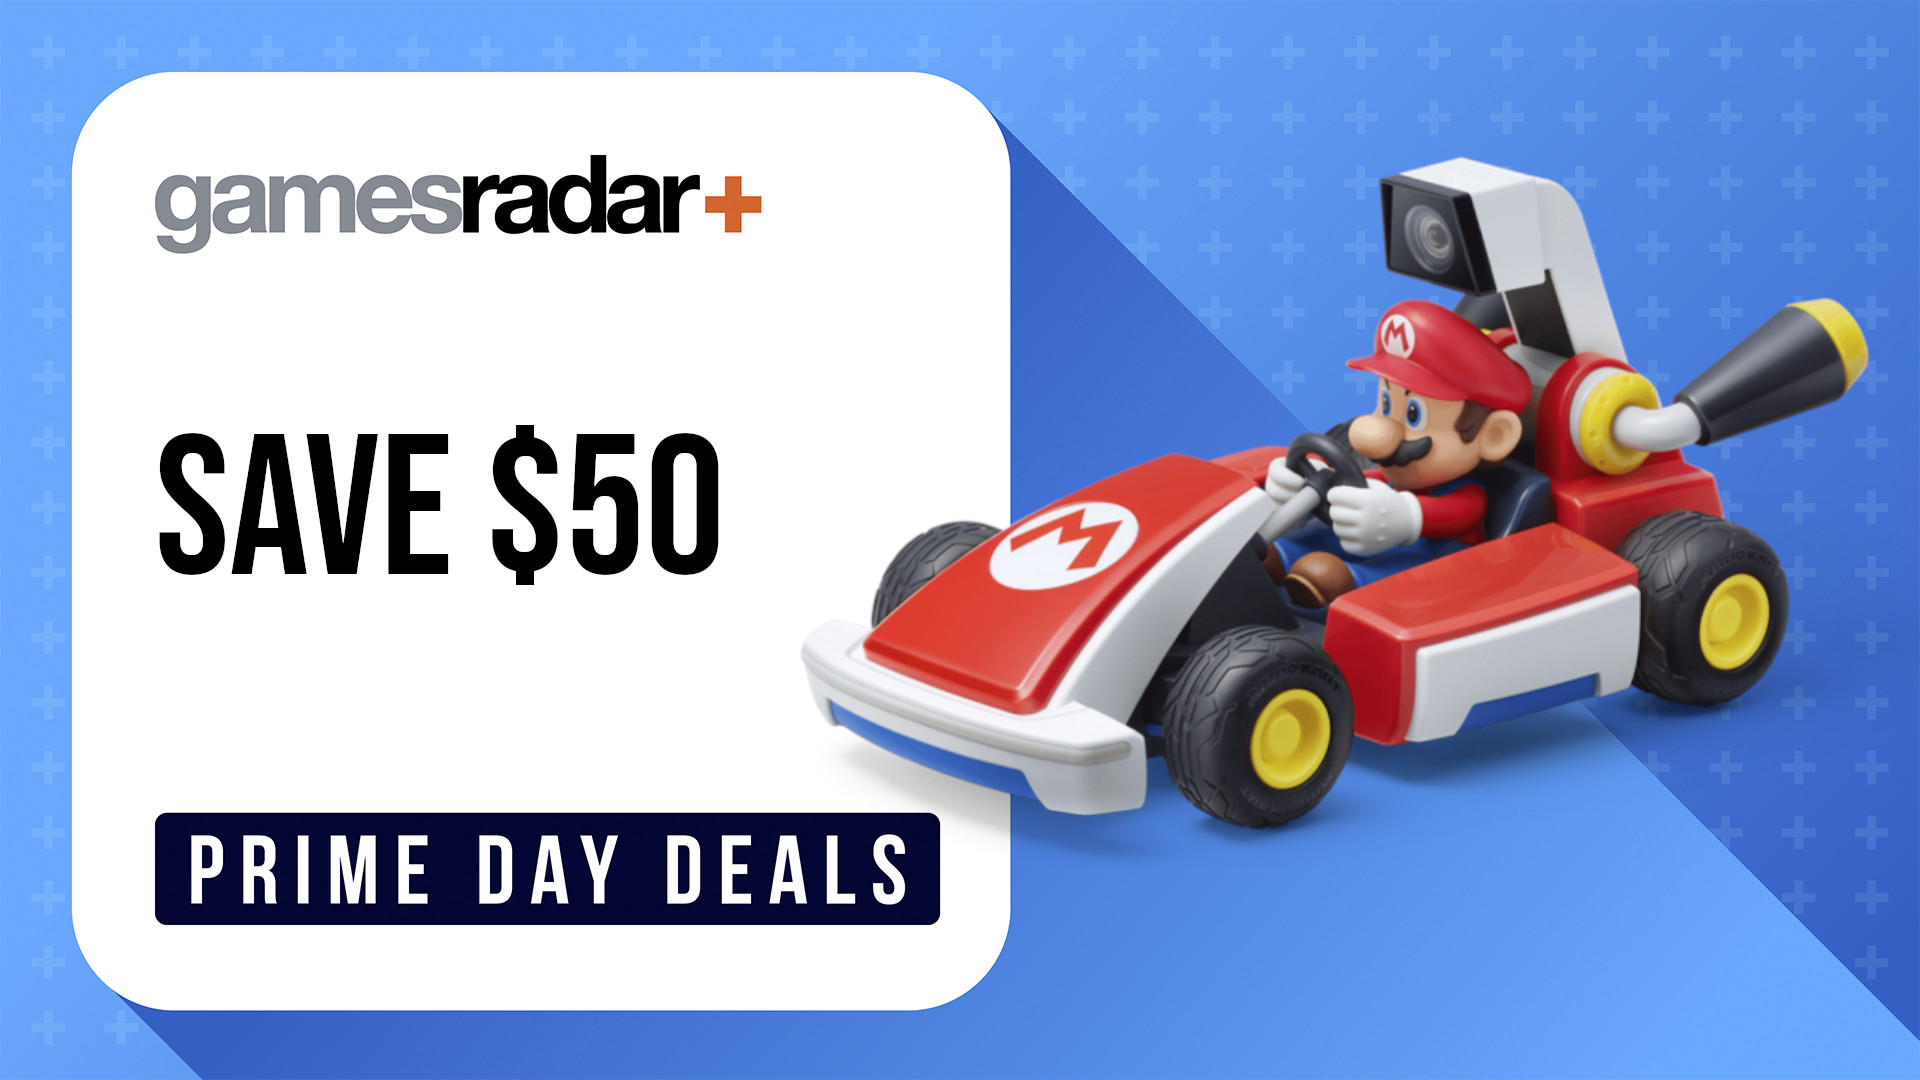 Mario Kart Live: Home Circuit review: Video game or pricey toy?